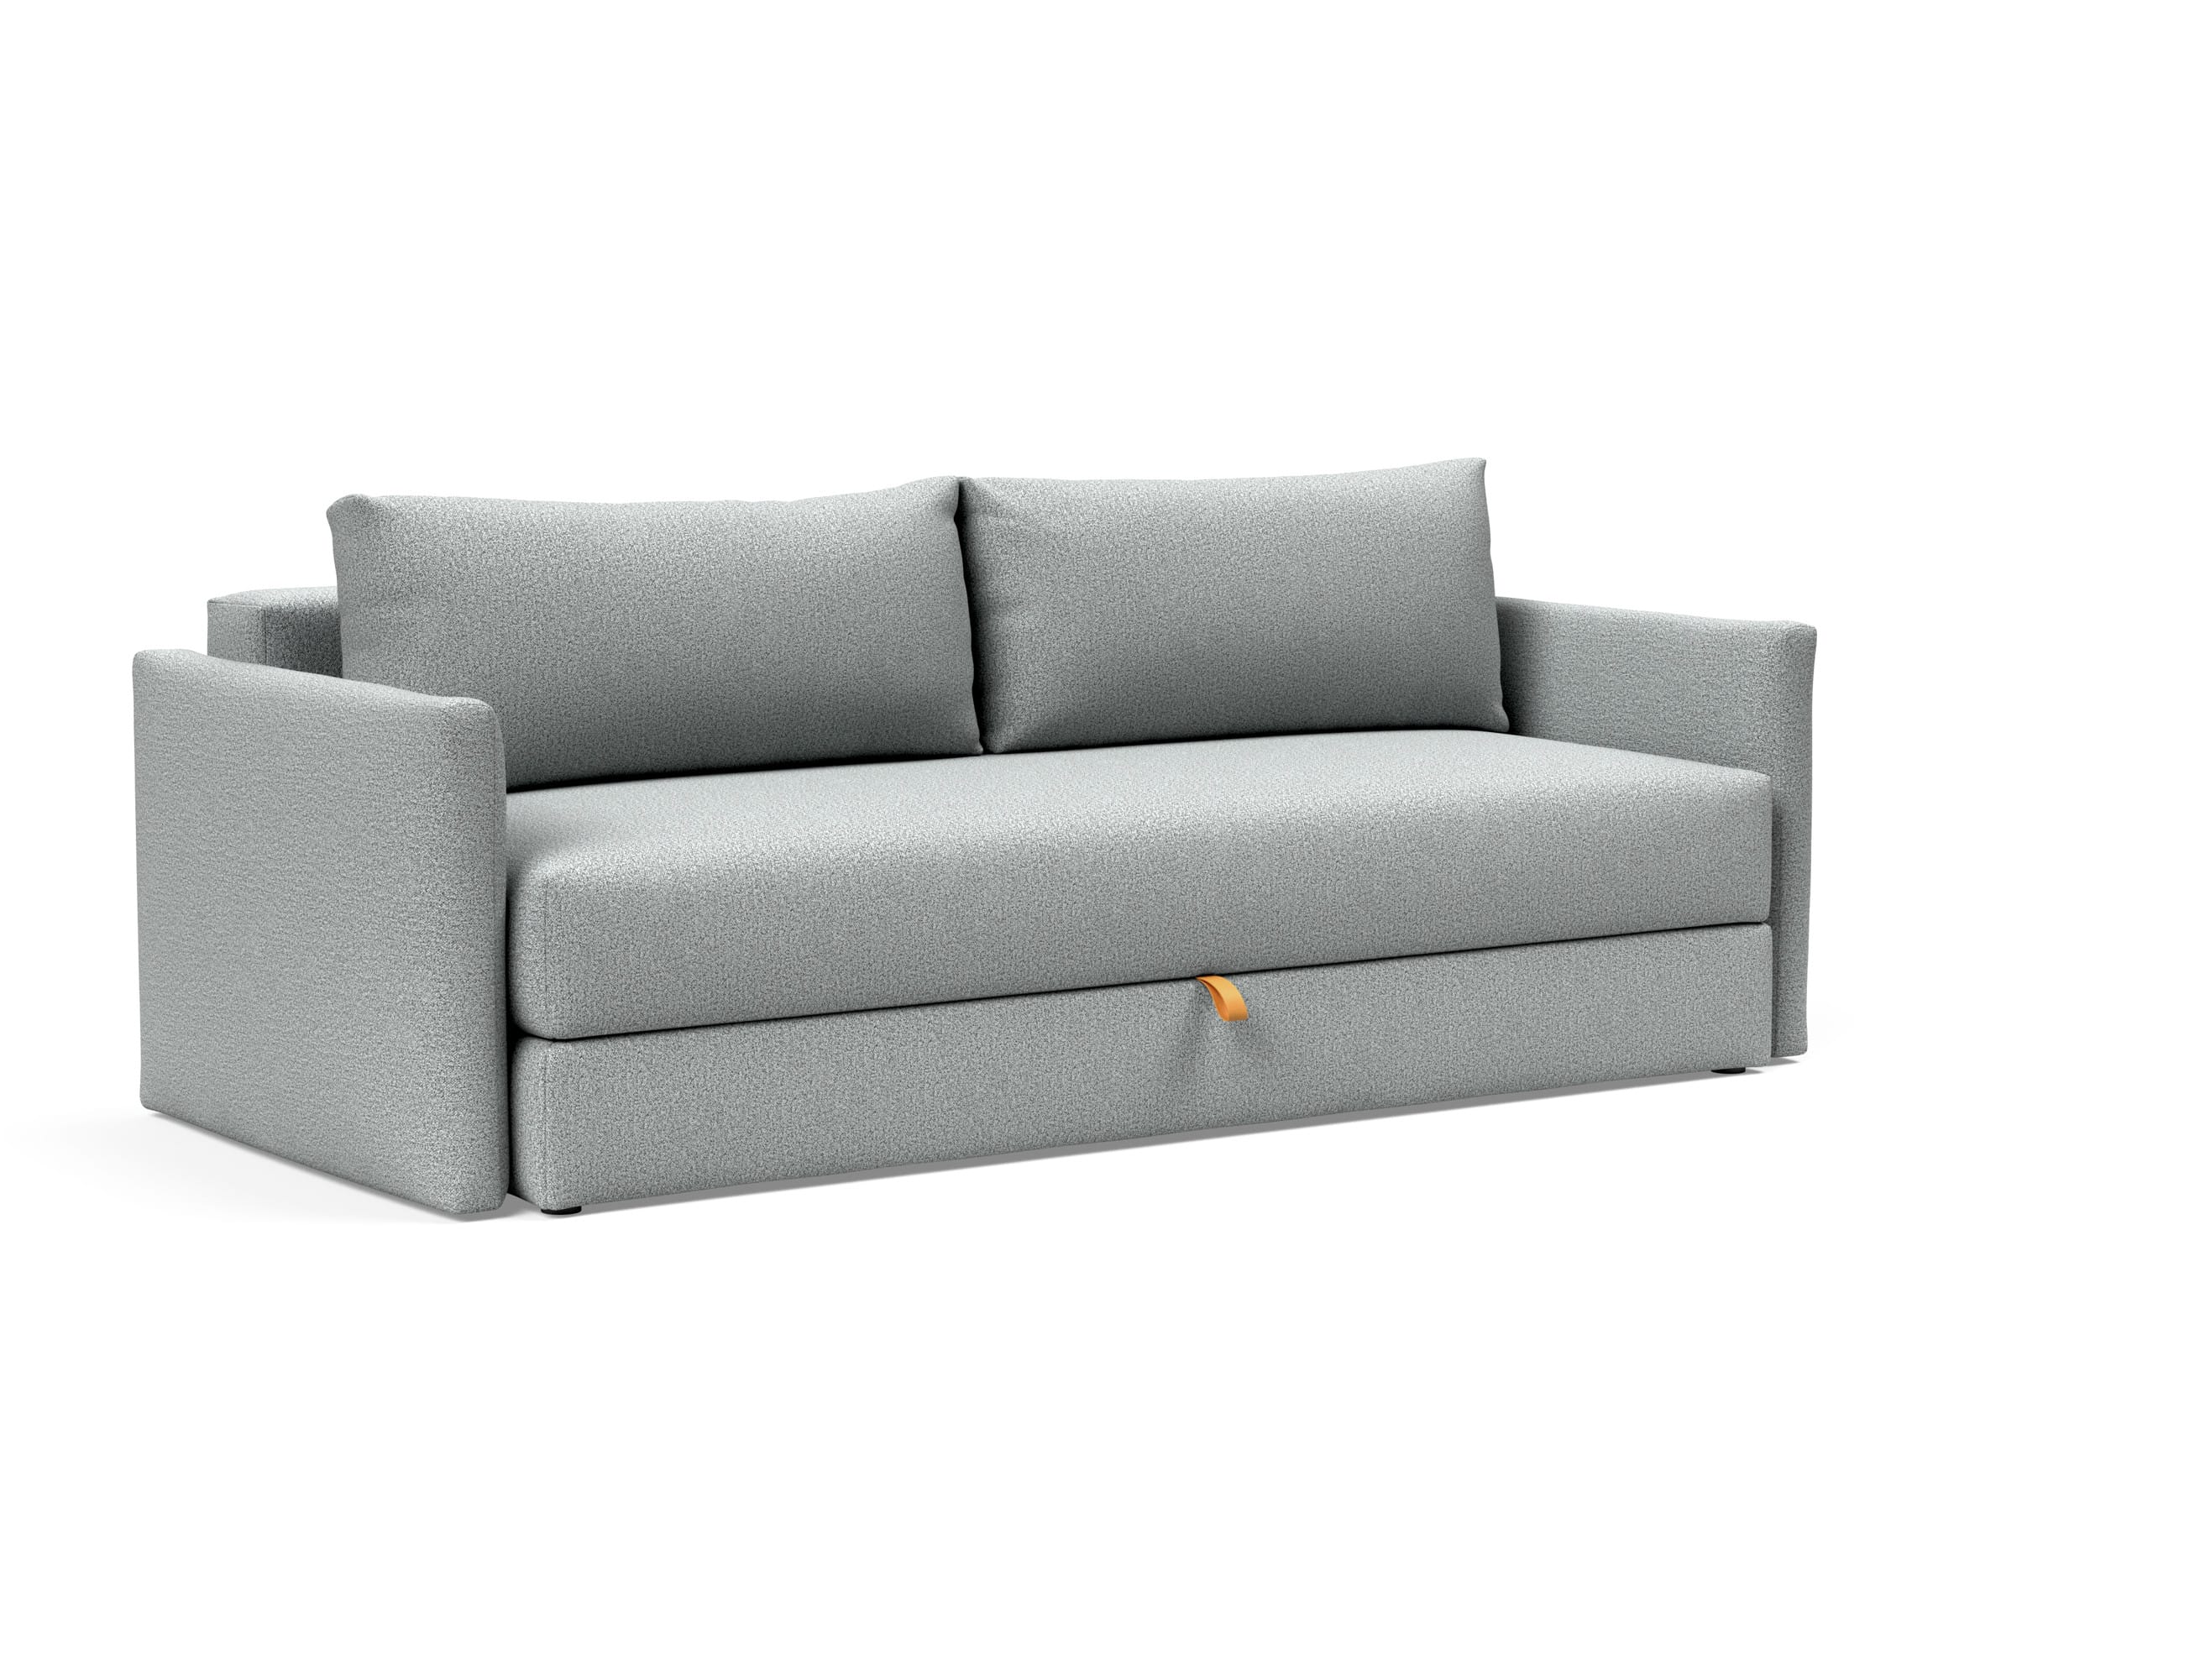 Tripi Sofa Bed w/Arms (Full Size) Melange Light Gray by Innovation